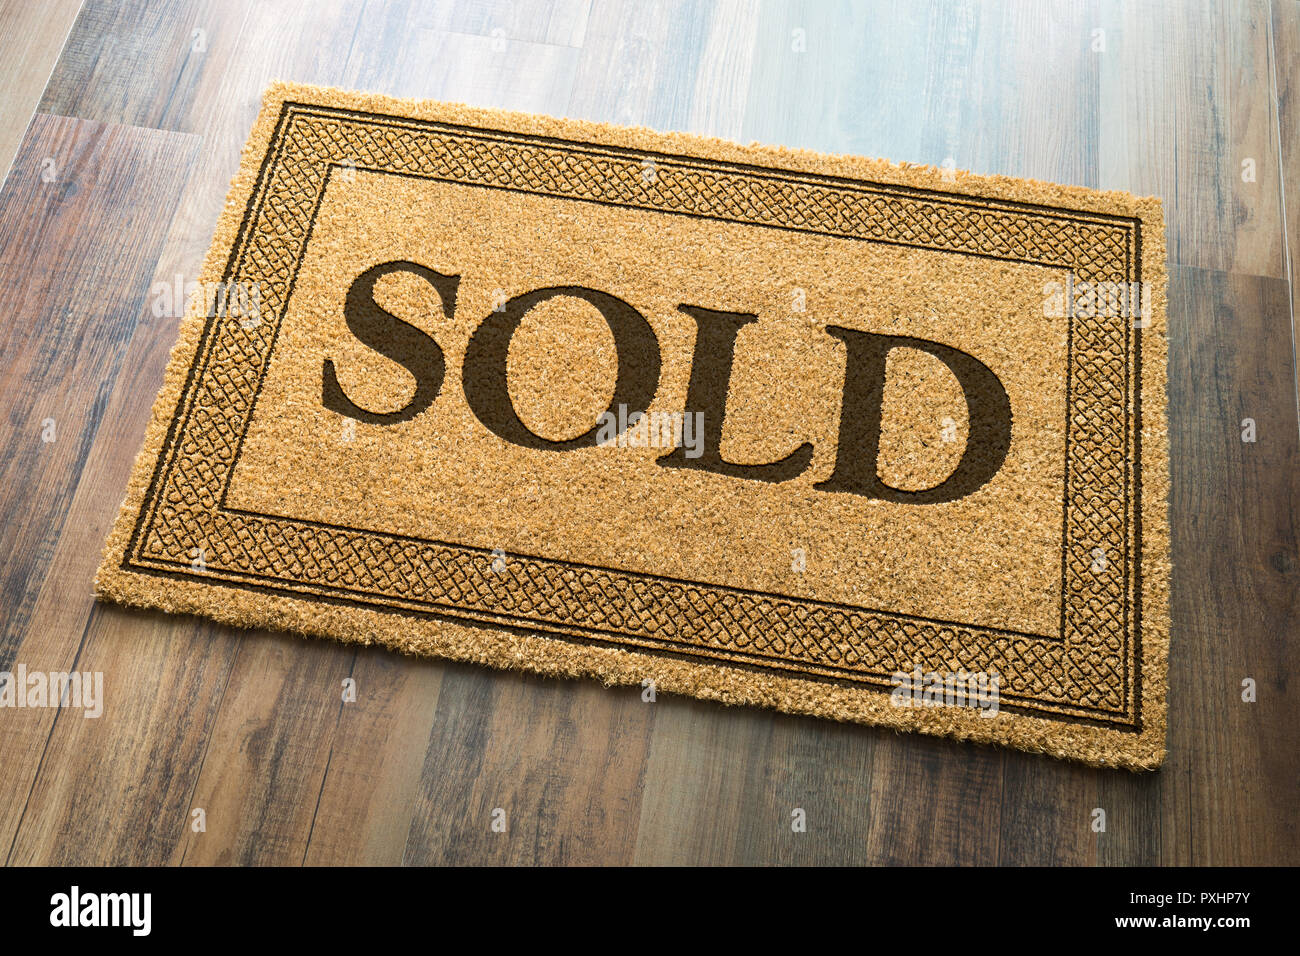 Sold Welcome Mat On A Wood Floor Background. Stock Photo